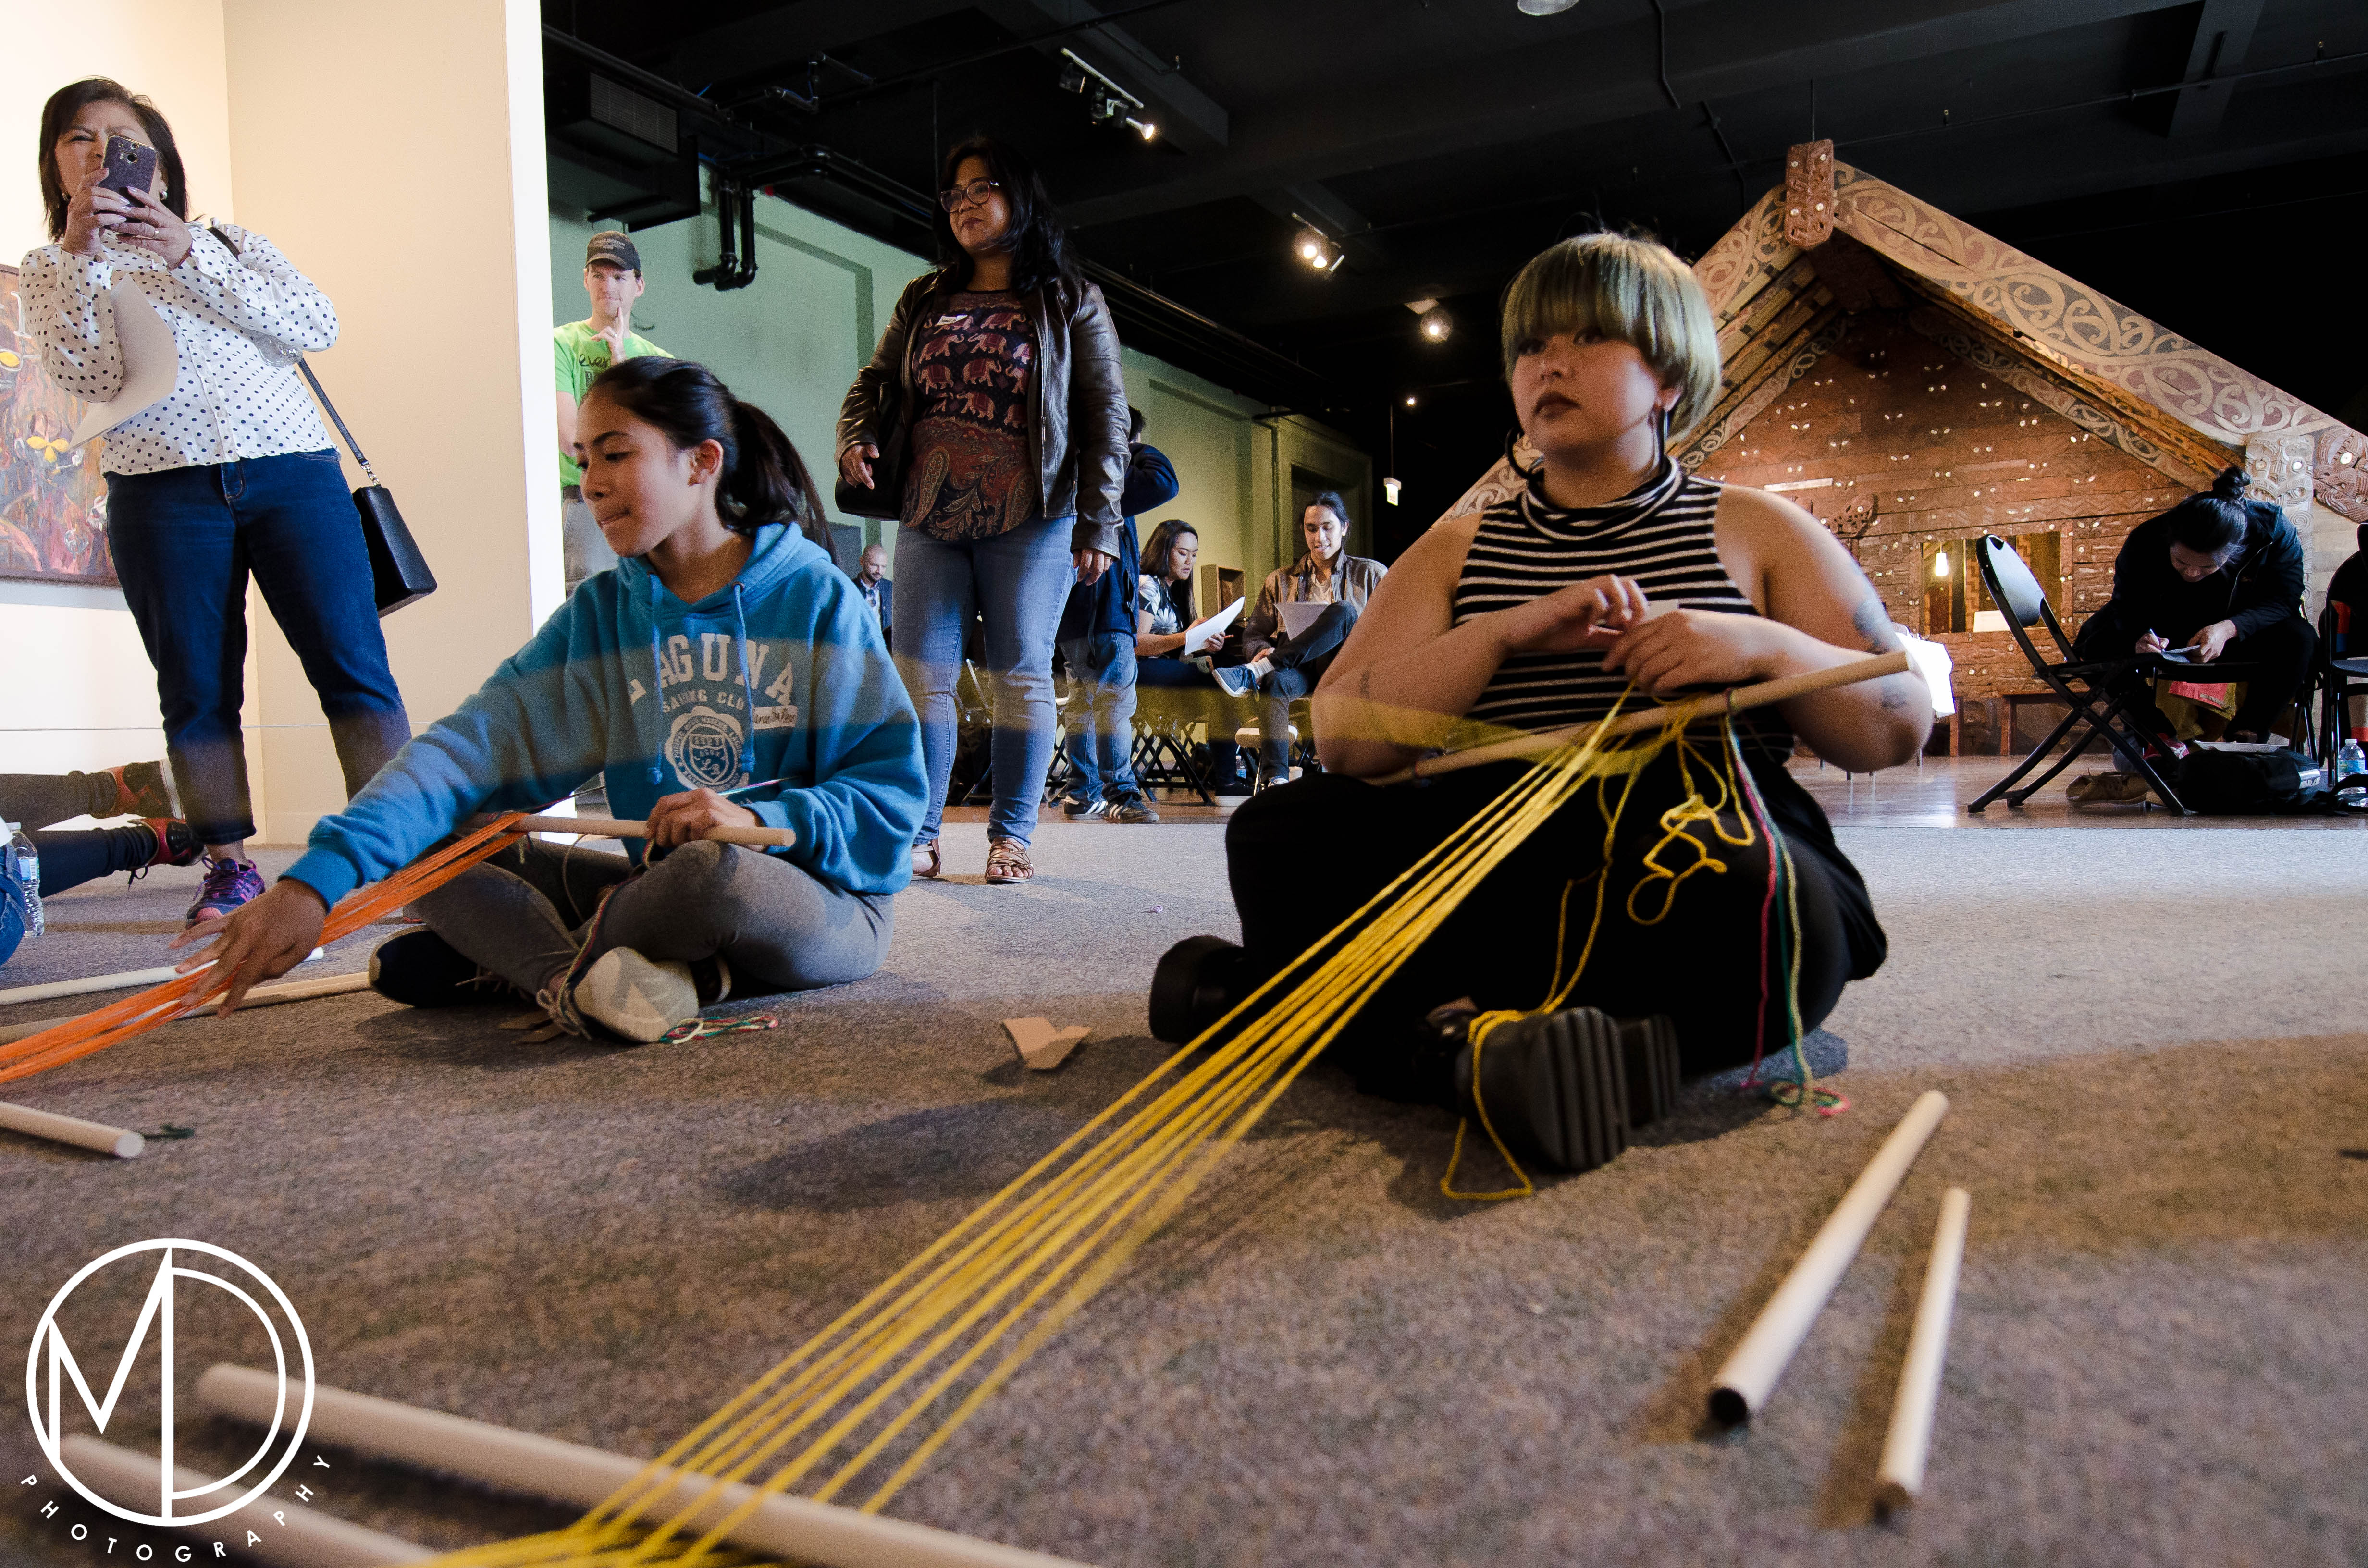 Avigail Bautista participating in the weaving activity. (c) Field Museum of Natural History - CC BY-NC 4.0